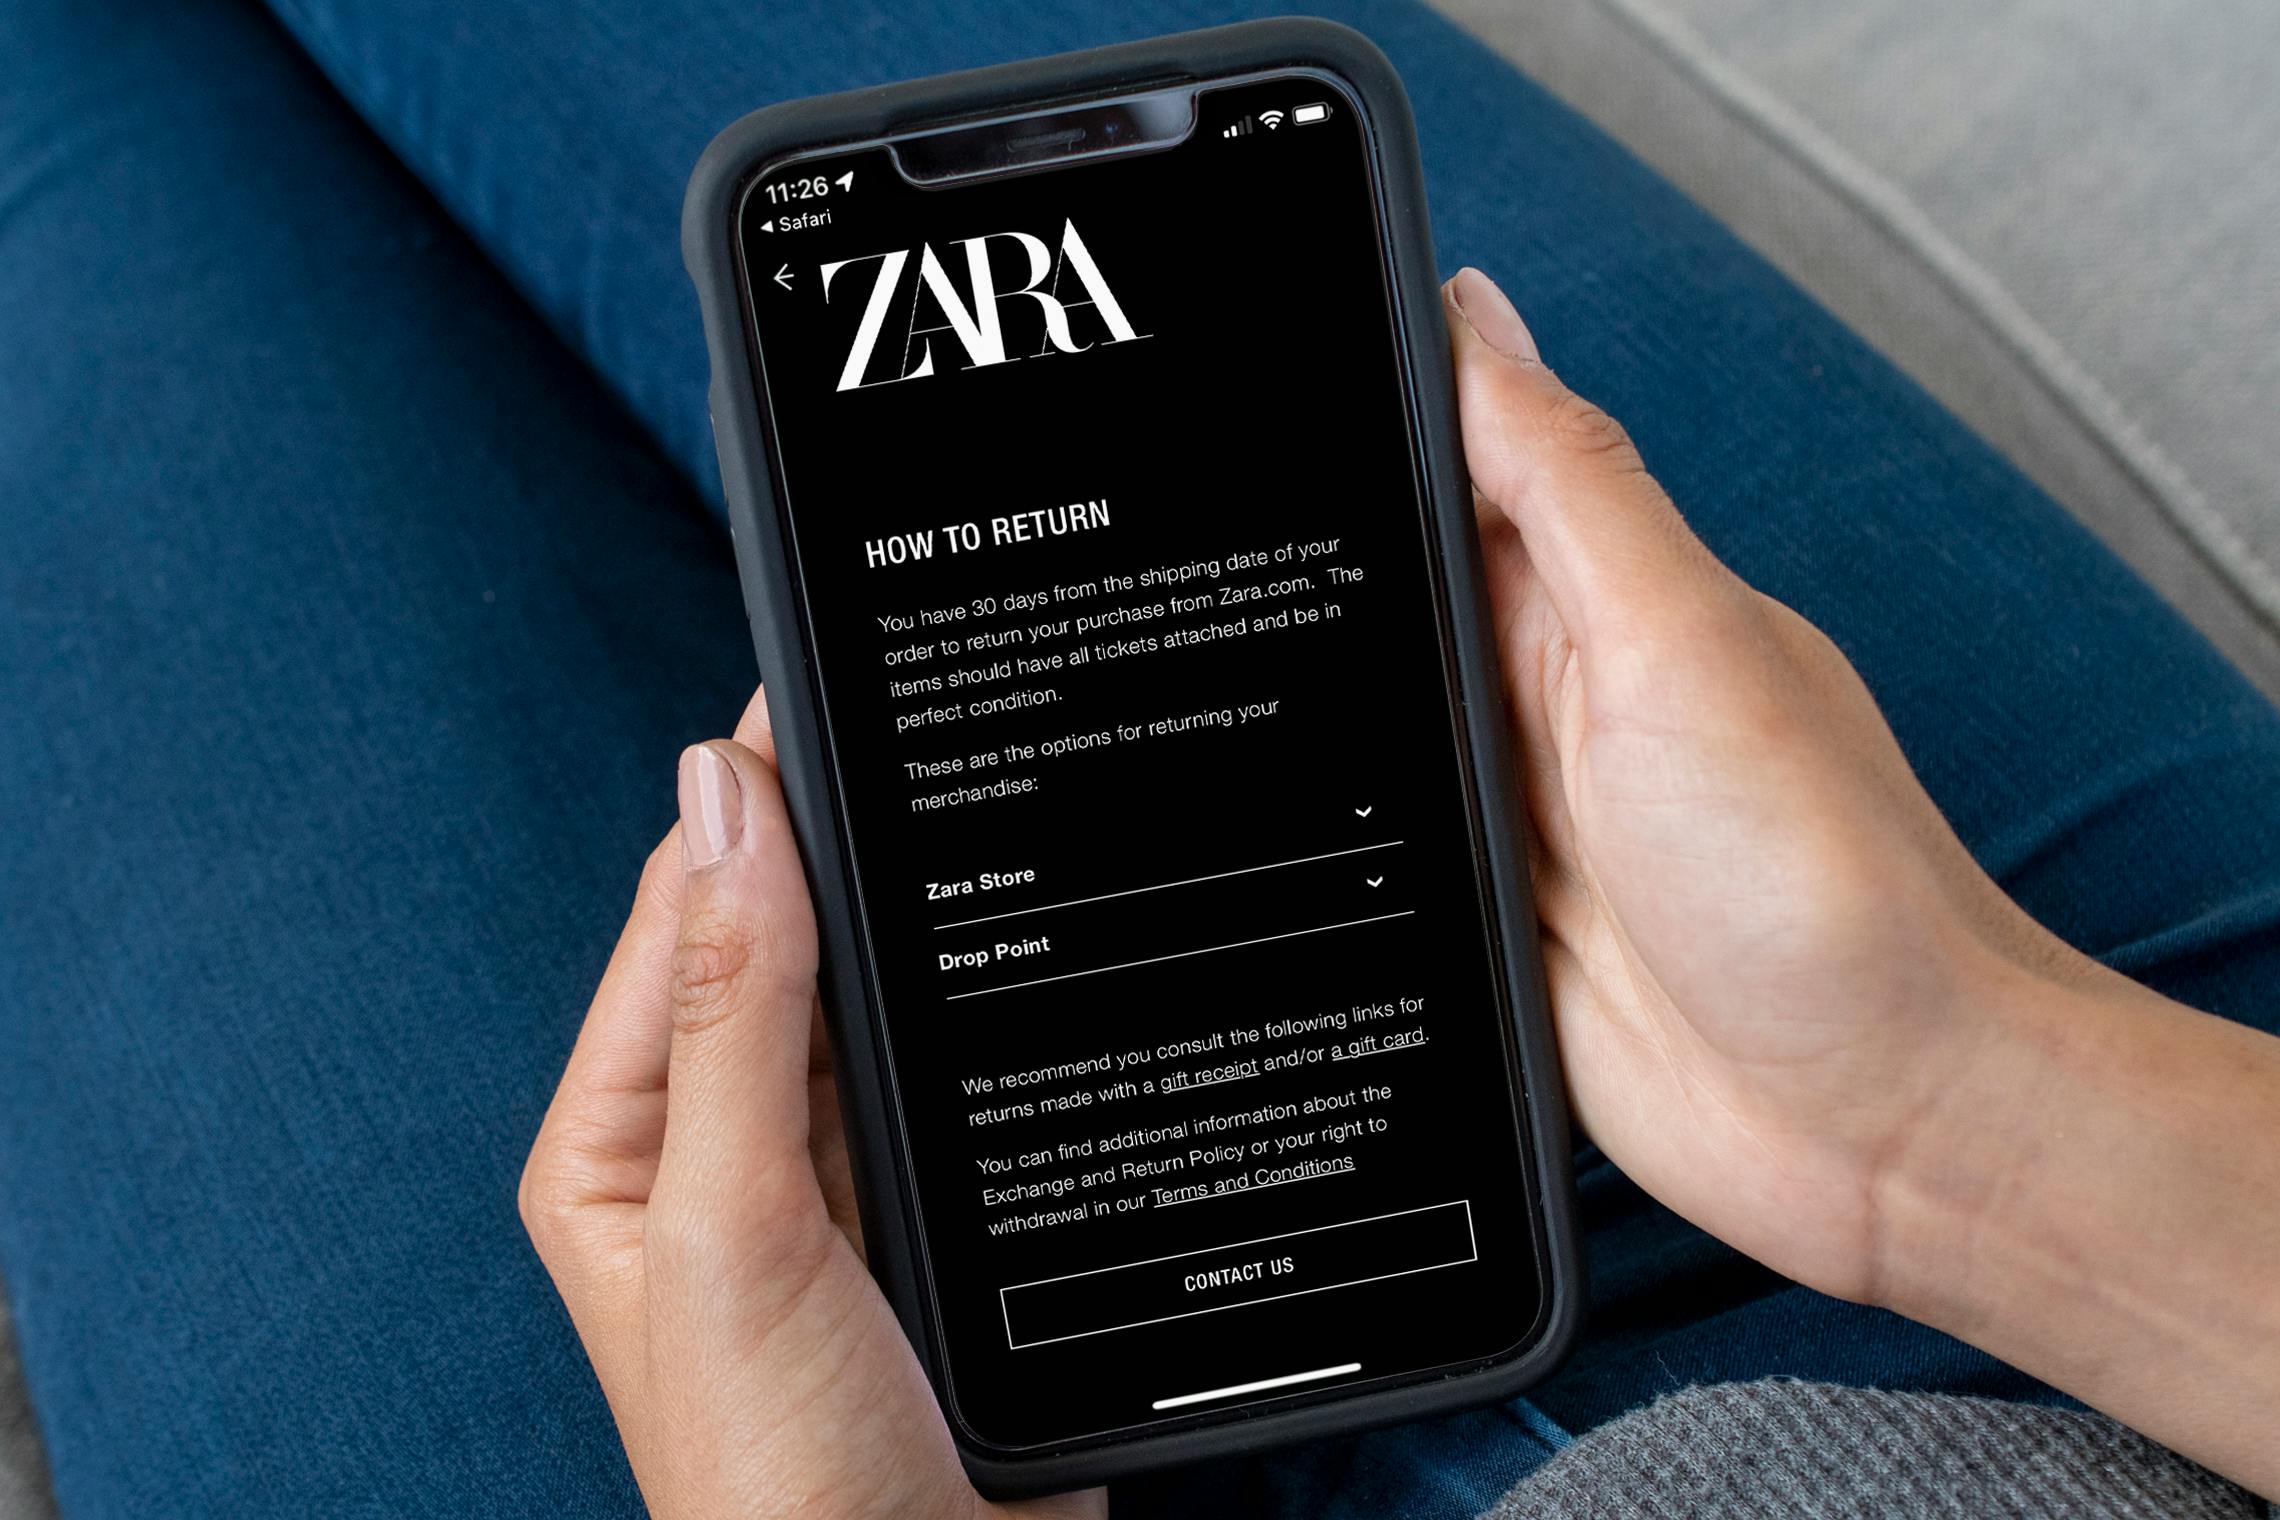 A person holding an iPhone displaying the Zara return policy on their website.